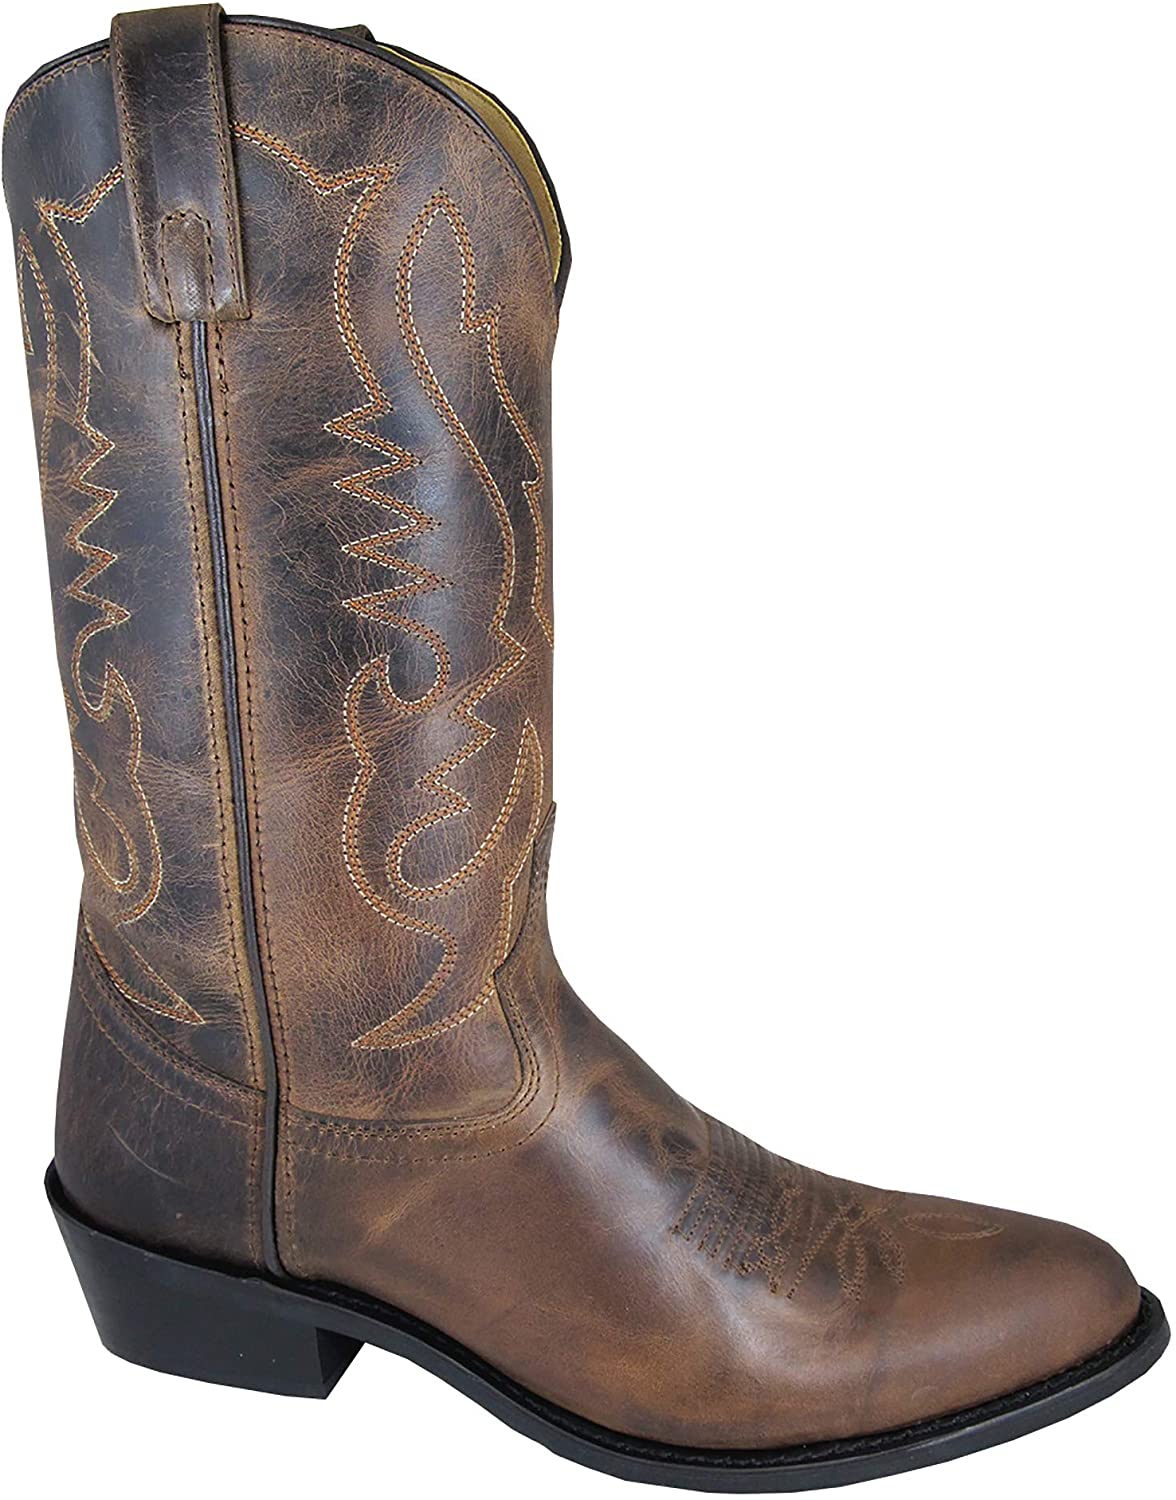 Men's Smoky Mountain Denver Leather Boot in Brown